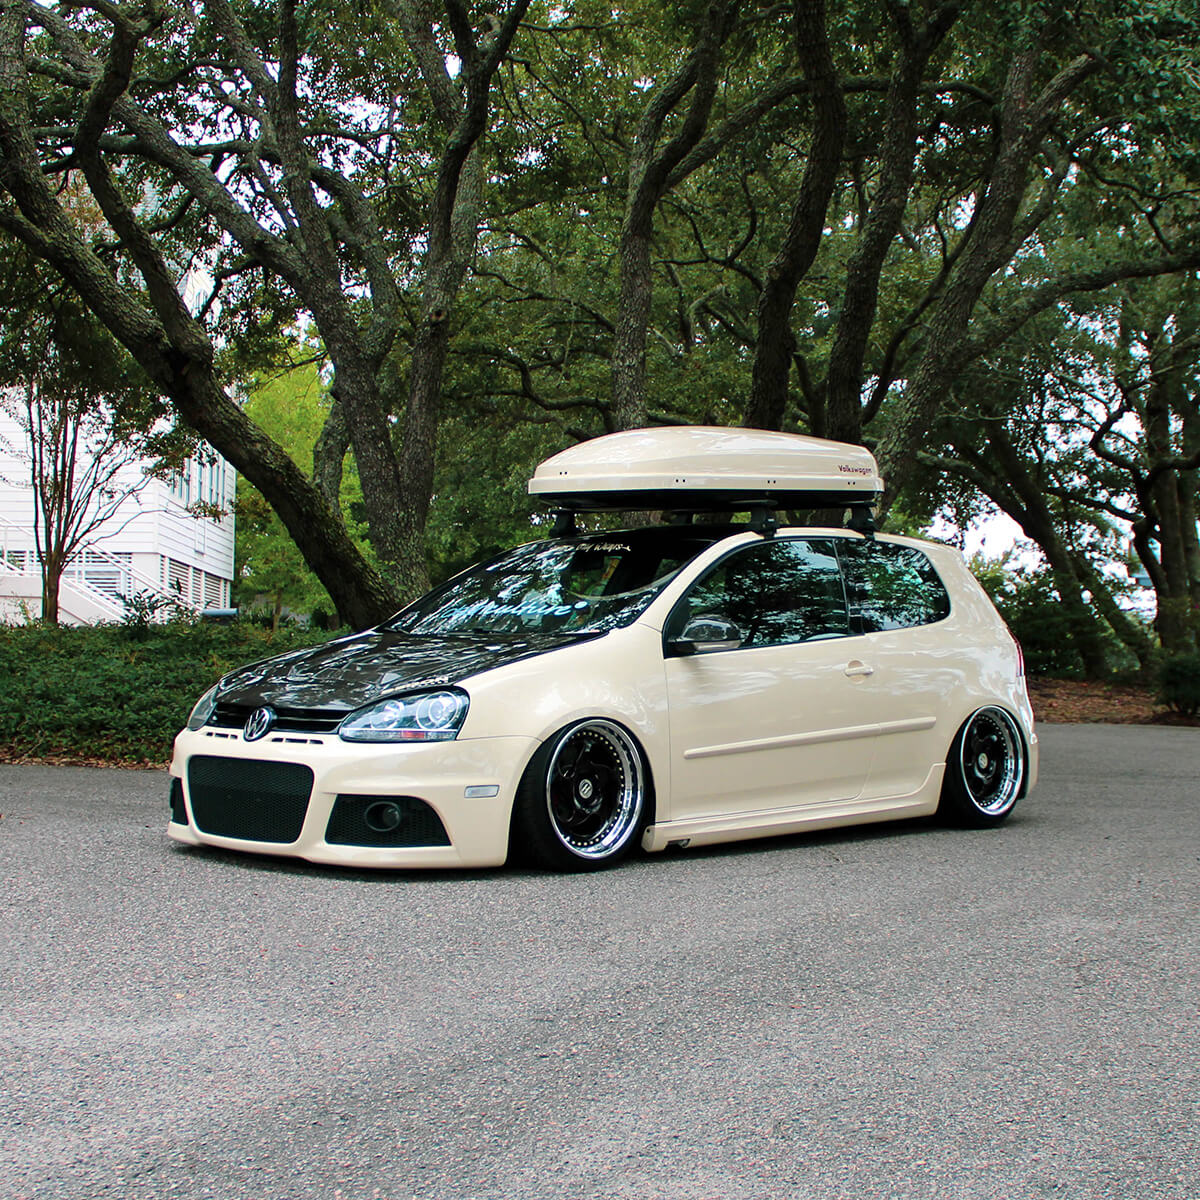 Stanced VW golf MK5 with air suspension